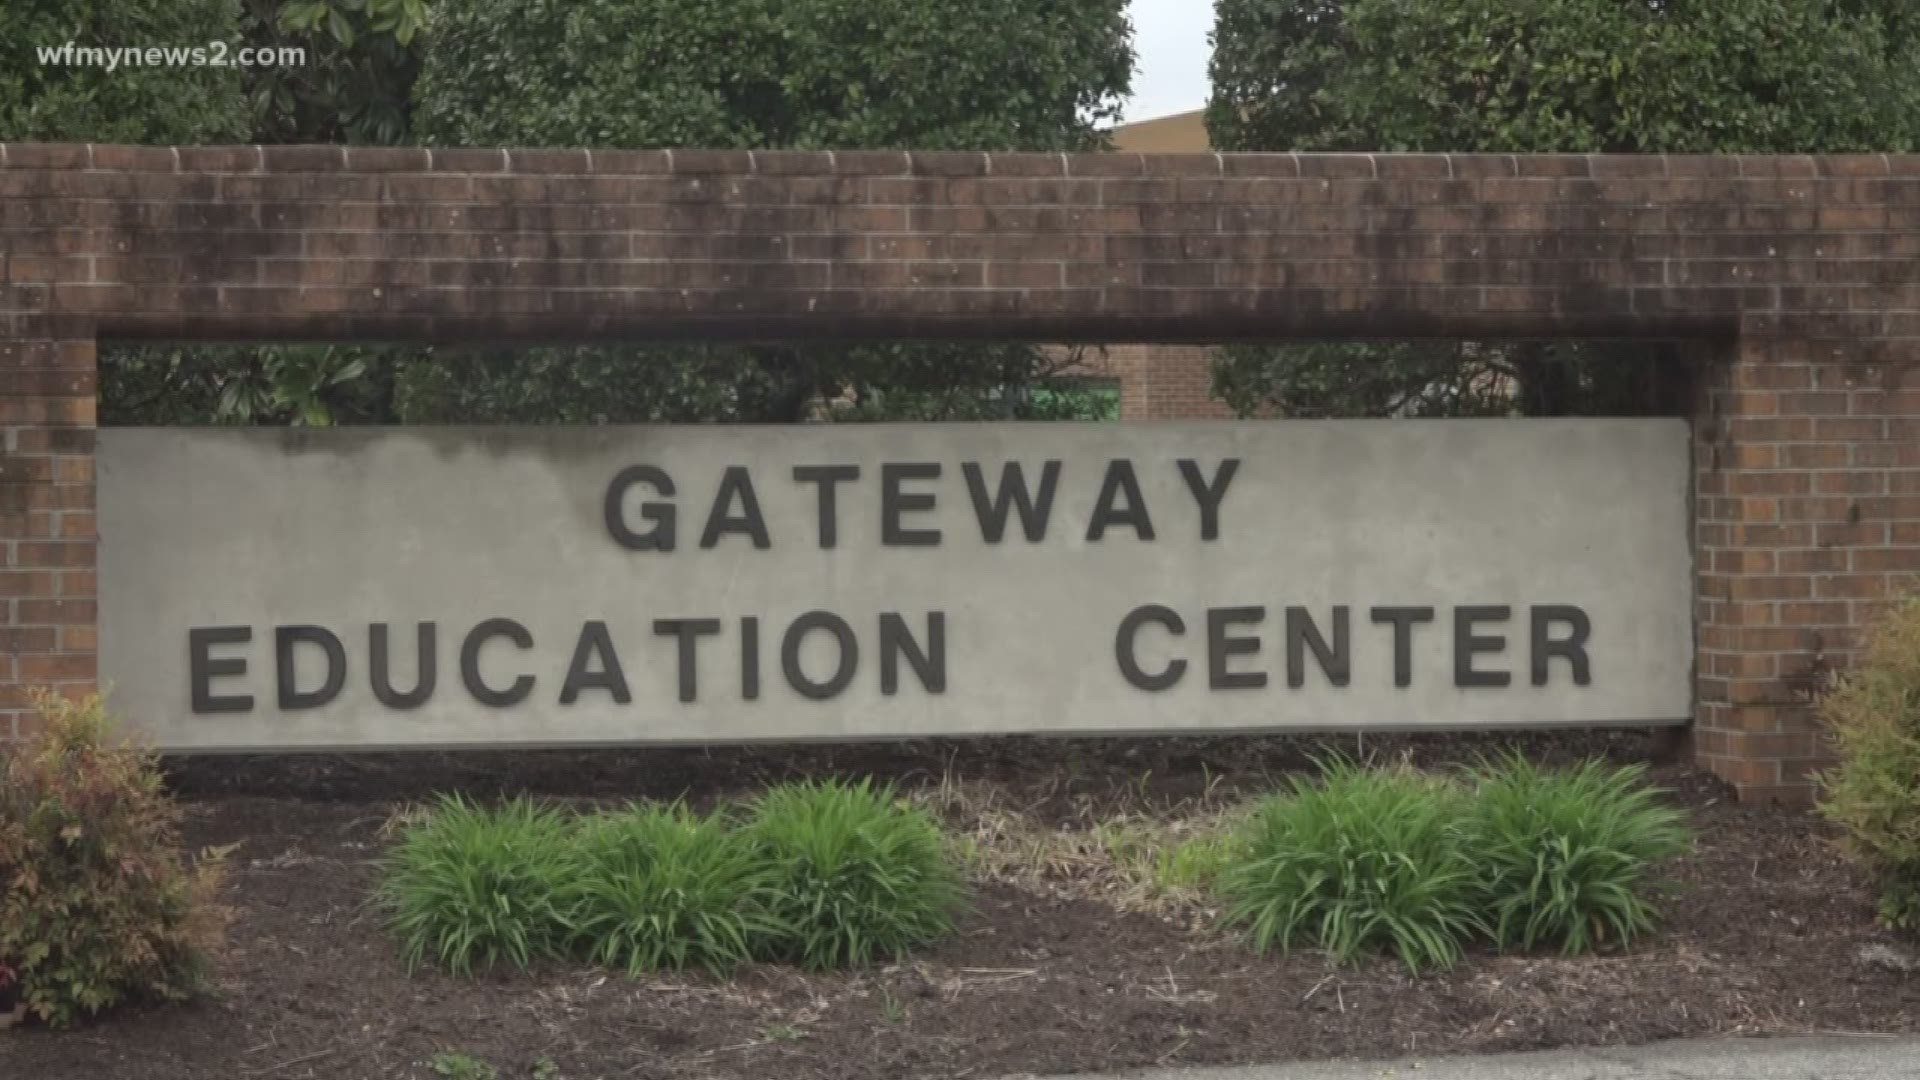 Parents of students at Gateway Education Center are wondering what they'll do if the Greensboro special needs school closes. All the parents we talked to say they got a call from the school Friday about it closing.